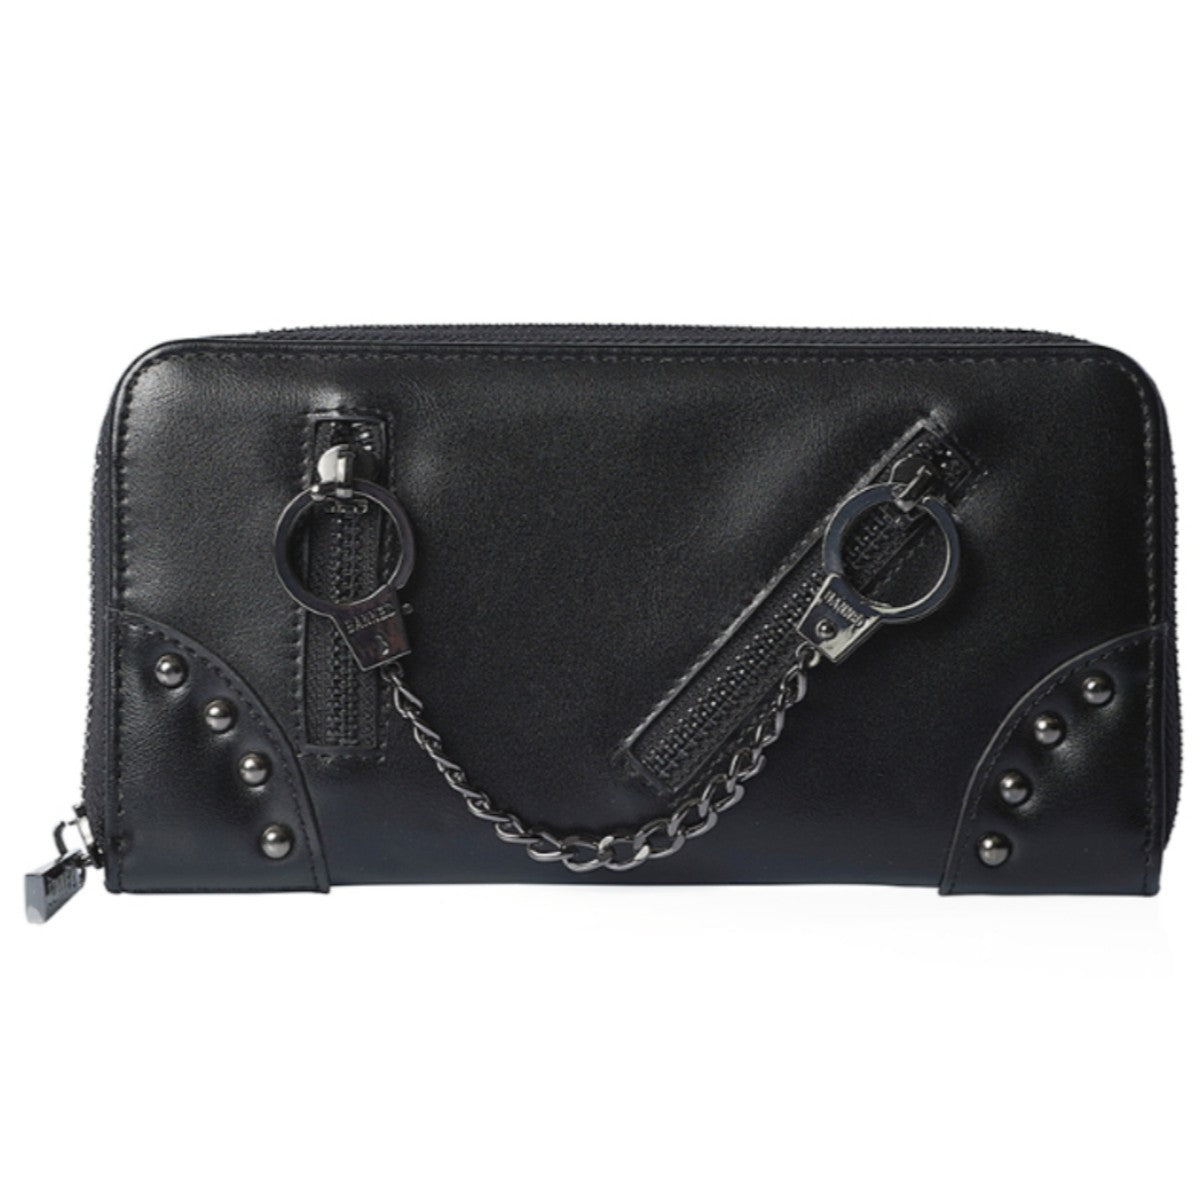 Banned Entangled Handcuff Studded Punk Wallet Gothic Purse